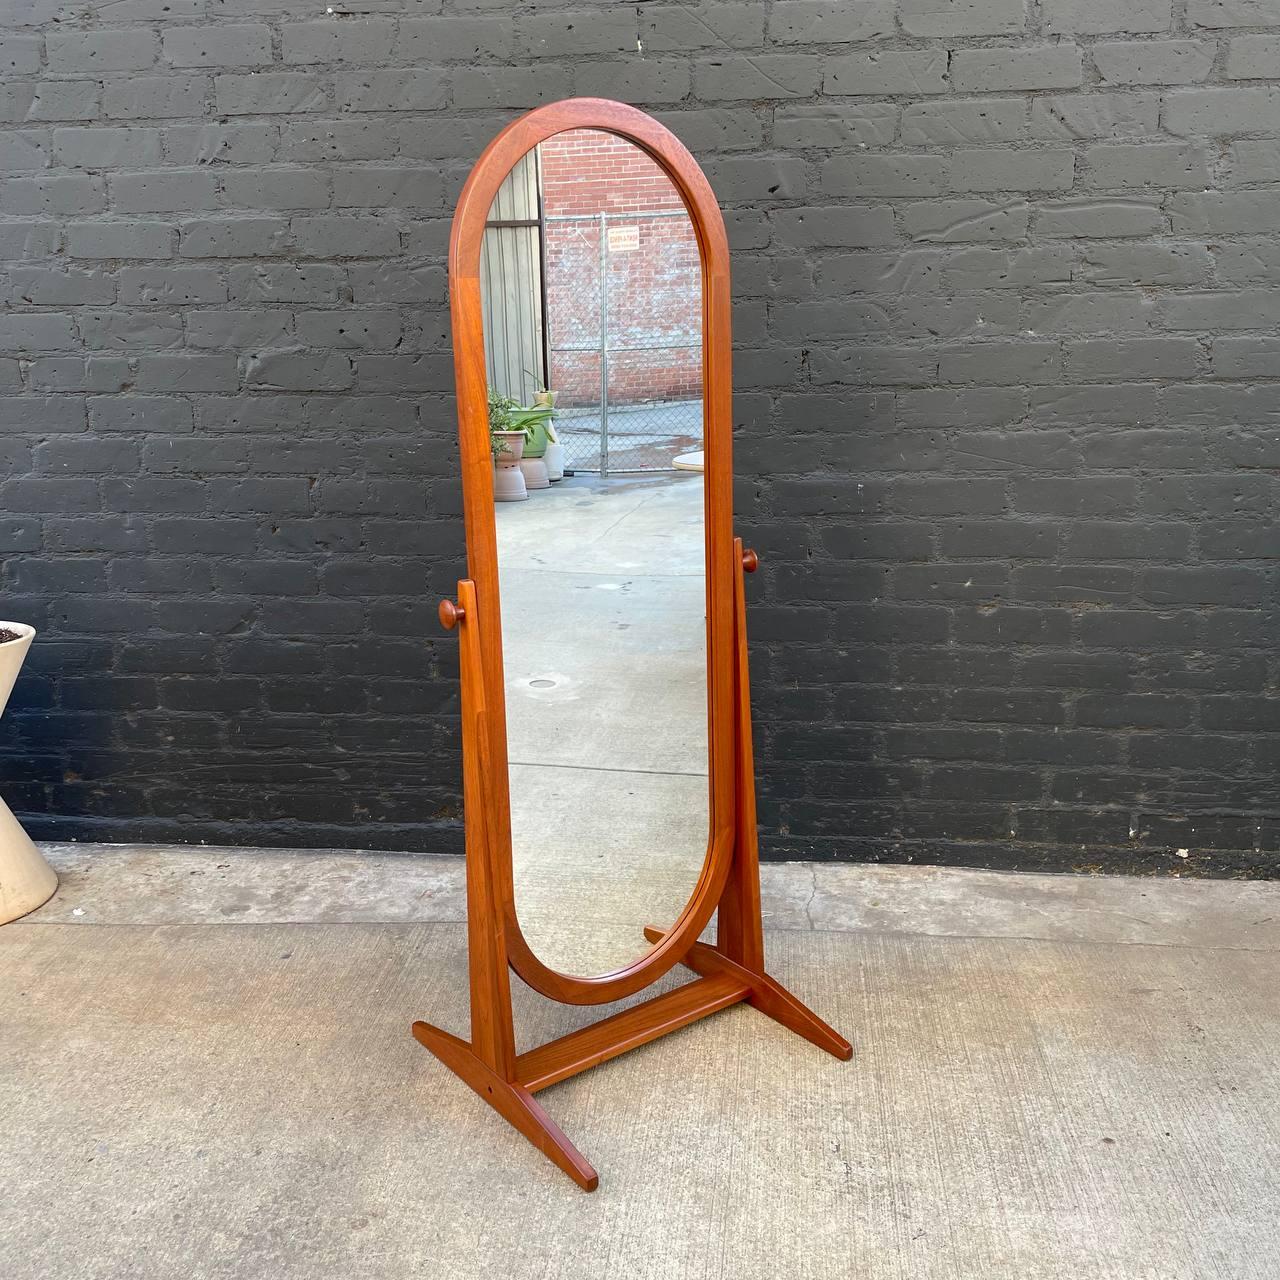 Condition: Expertly Refinished, Original Mirror in Great Condition

With over 15 years of experience, our workshop has followed a careful process of restoration, showcasing our passion and creativity for vintage designs that can seamlessly be